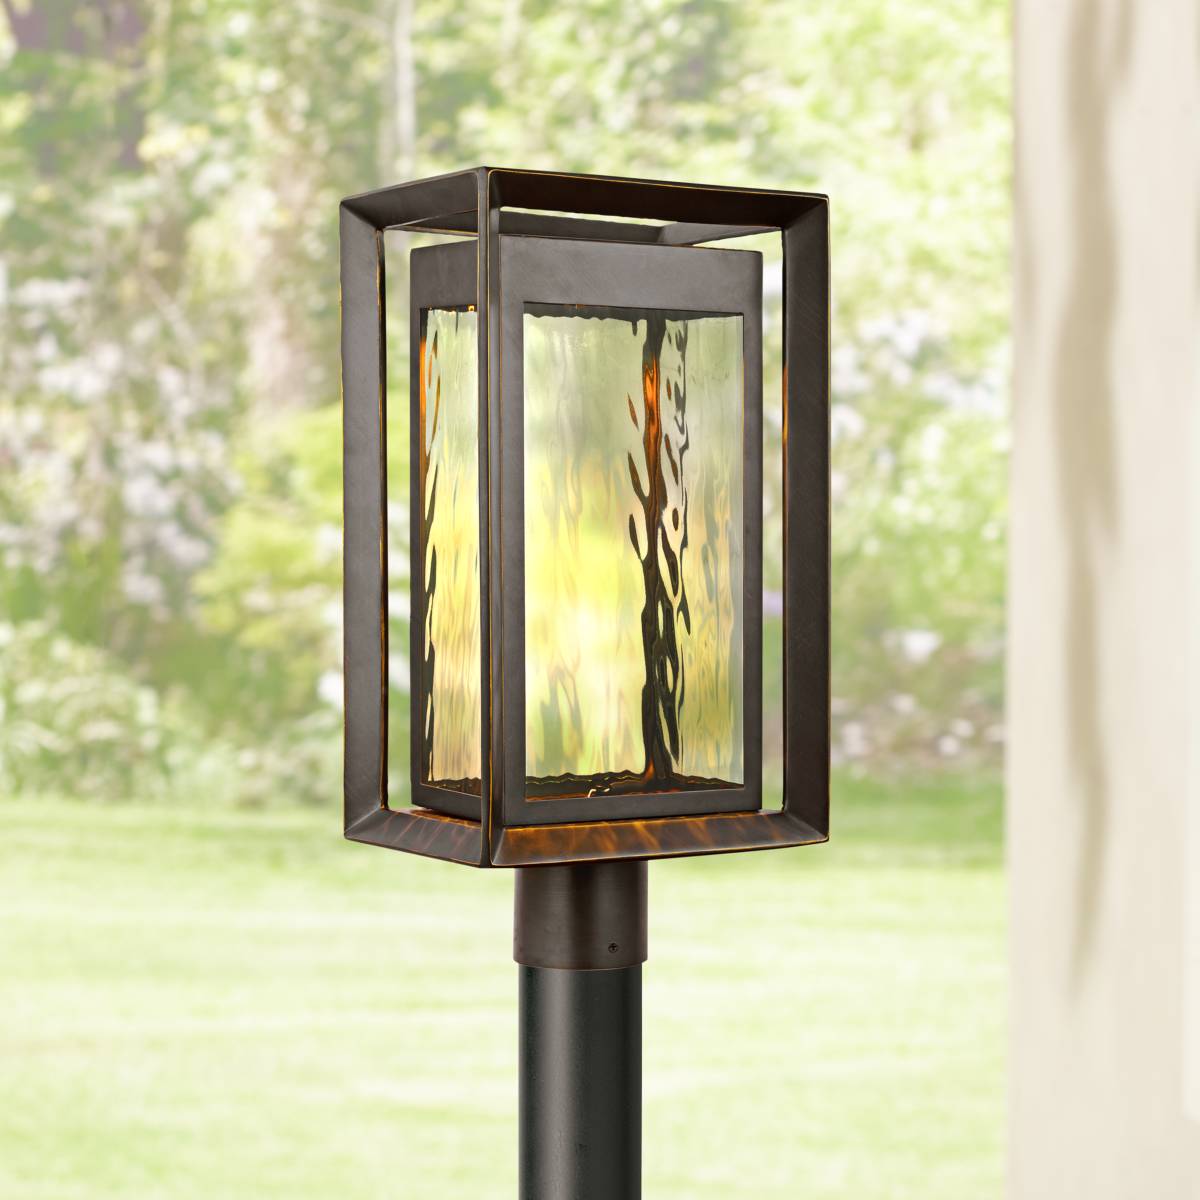 LED Post Lights - Outdoor Lighting | Lamps Plus